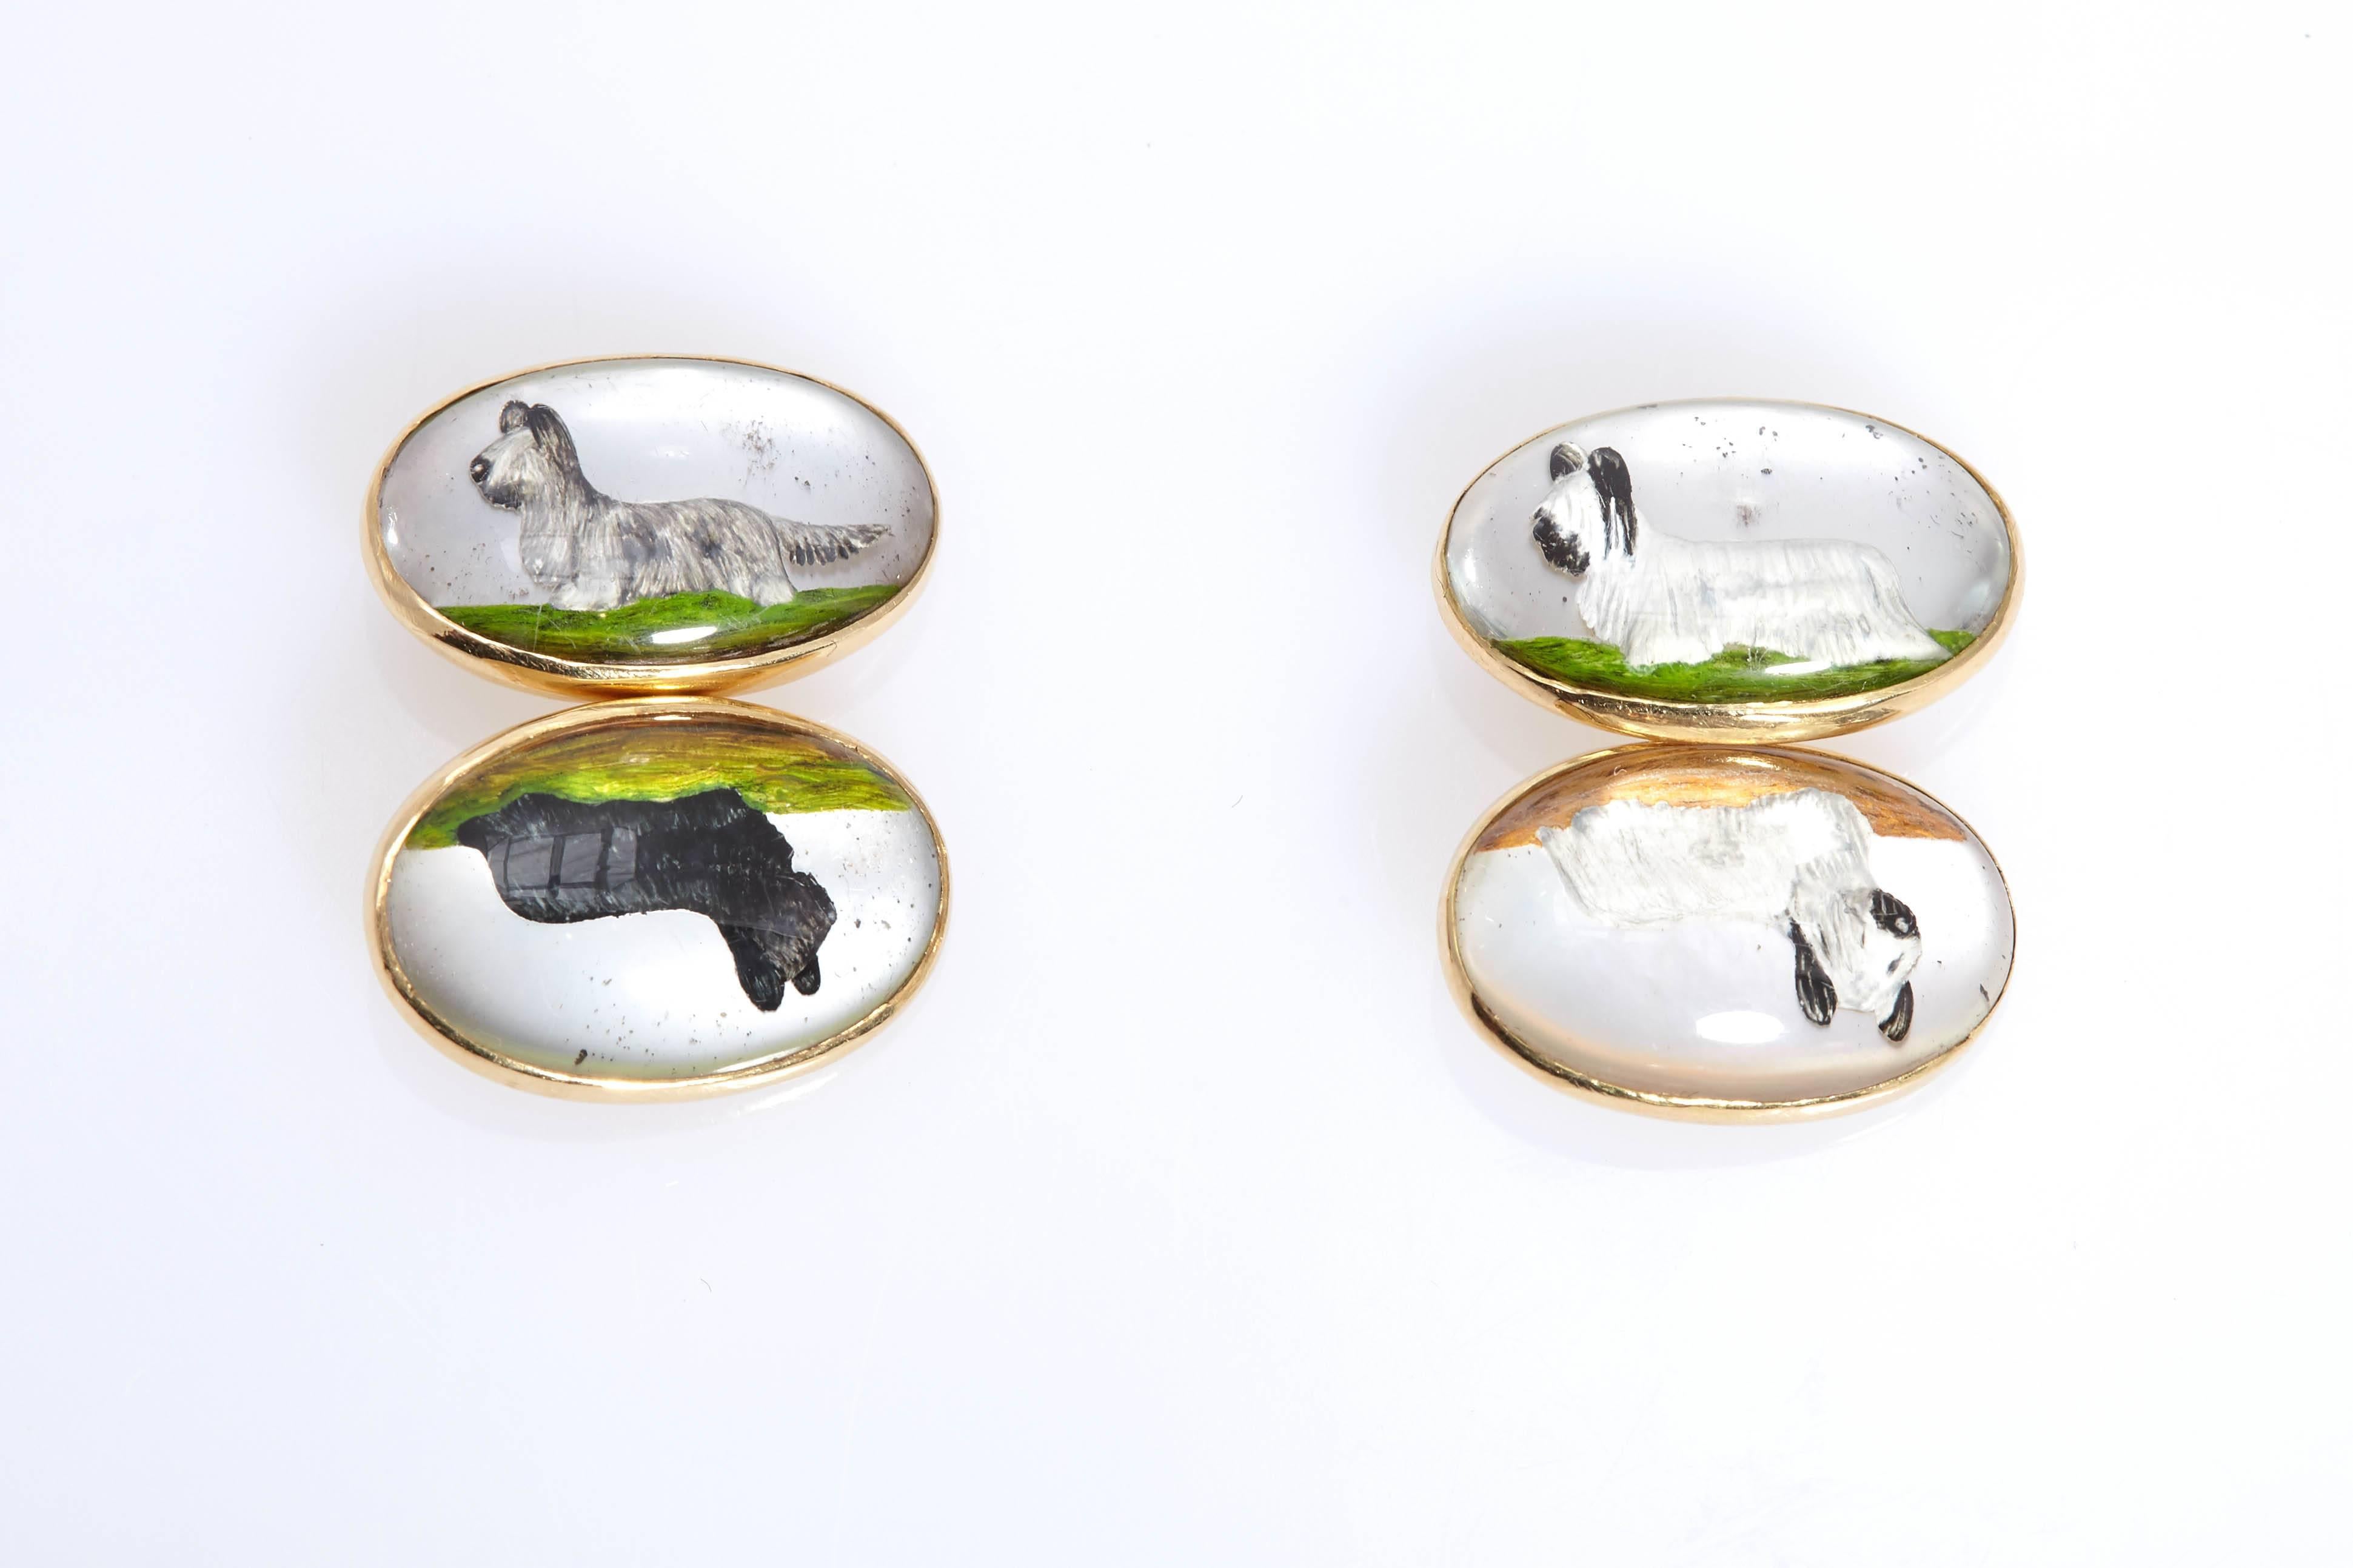 Retro cufflinks in 18kt yellow gold, enamel and reverse crystal, with terrier dog images. Circa 1950